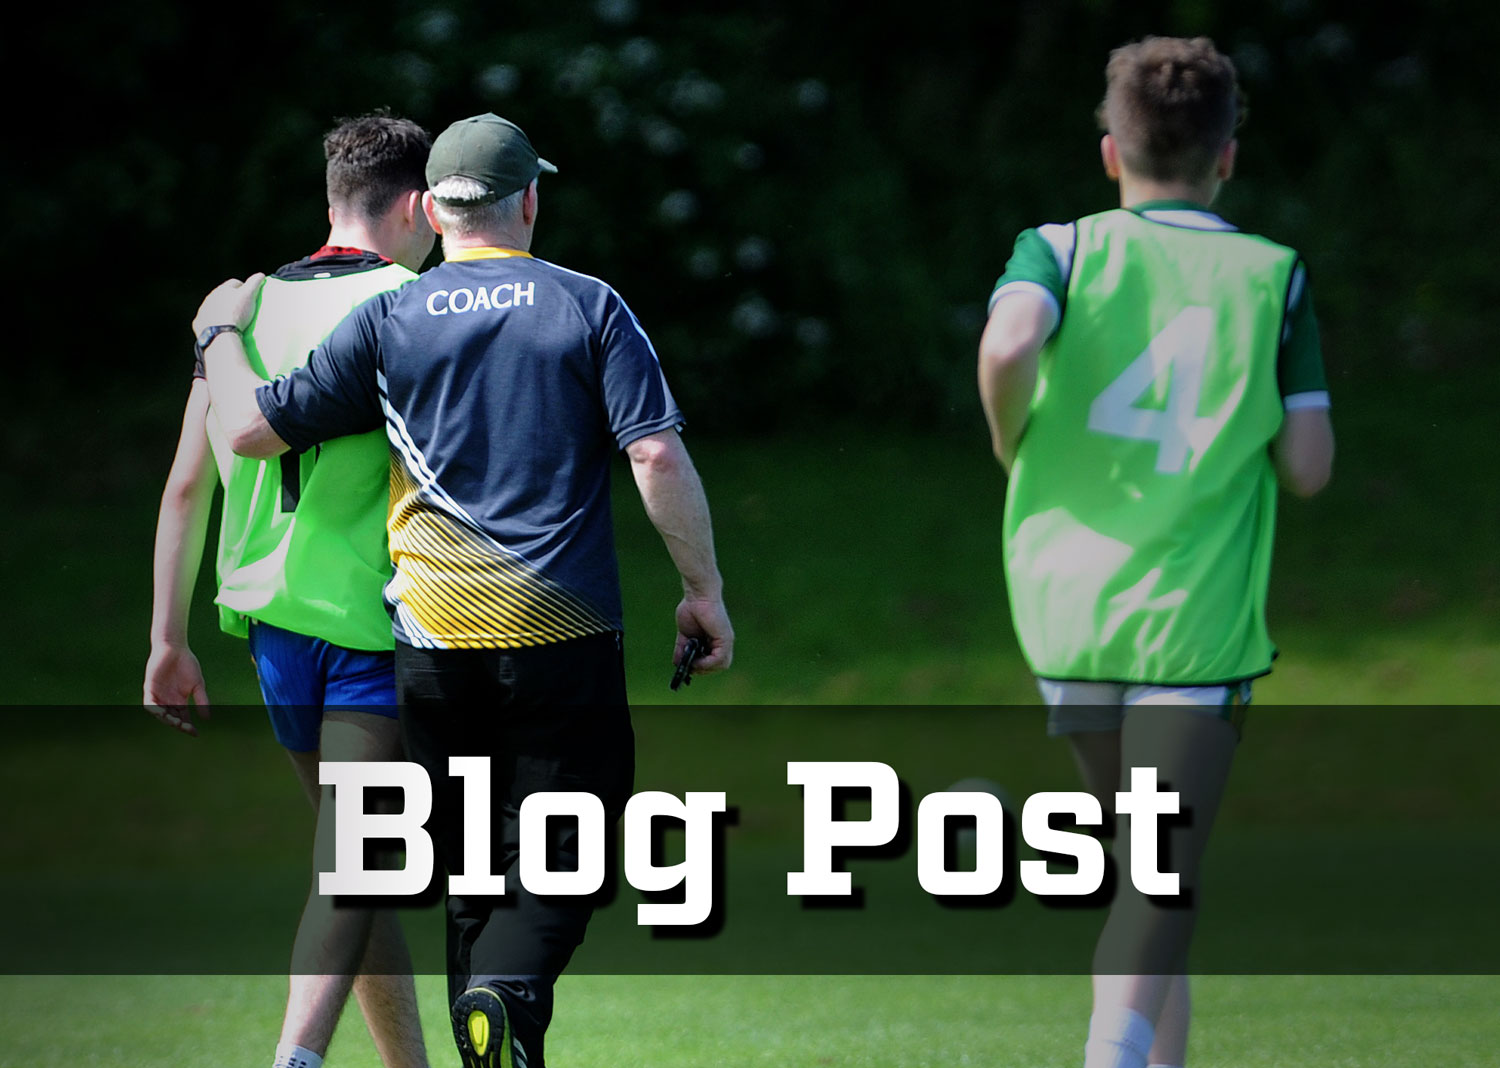 By Kevin Broderick, Coaching Officer, Raheny GAA.